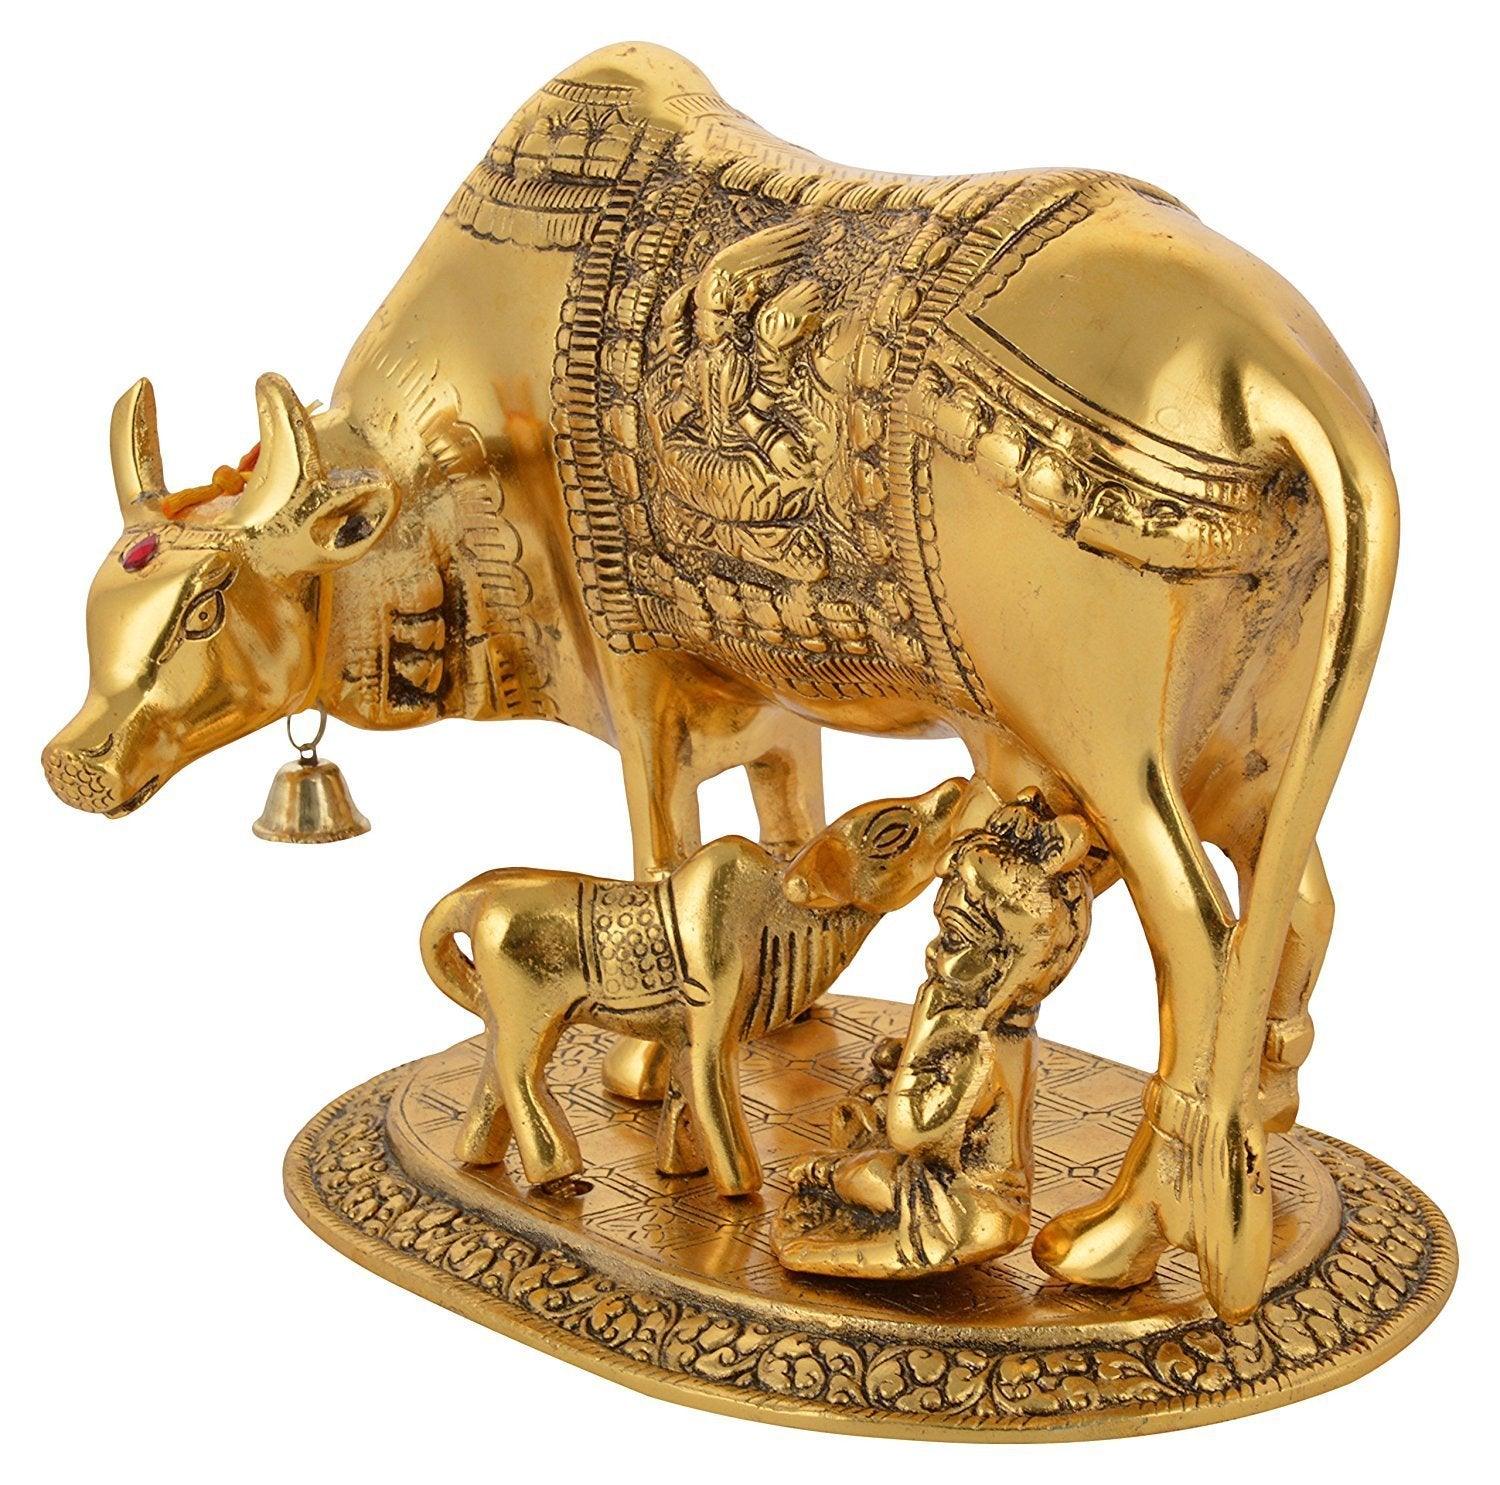 Large Gold Elegant Kamdhenu Cow and Calf Metal Statue Spiritual Showpiece Figurine Sculpture House Warming Gift & Home Decor Congratulatory Blessing Gift Item, Large size approx 9 inch - GreentouchCrafts